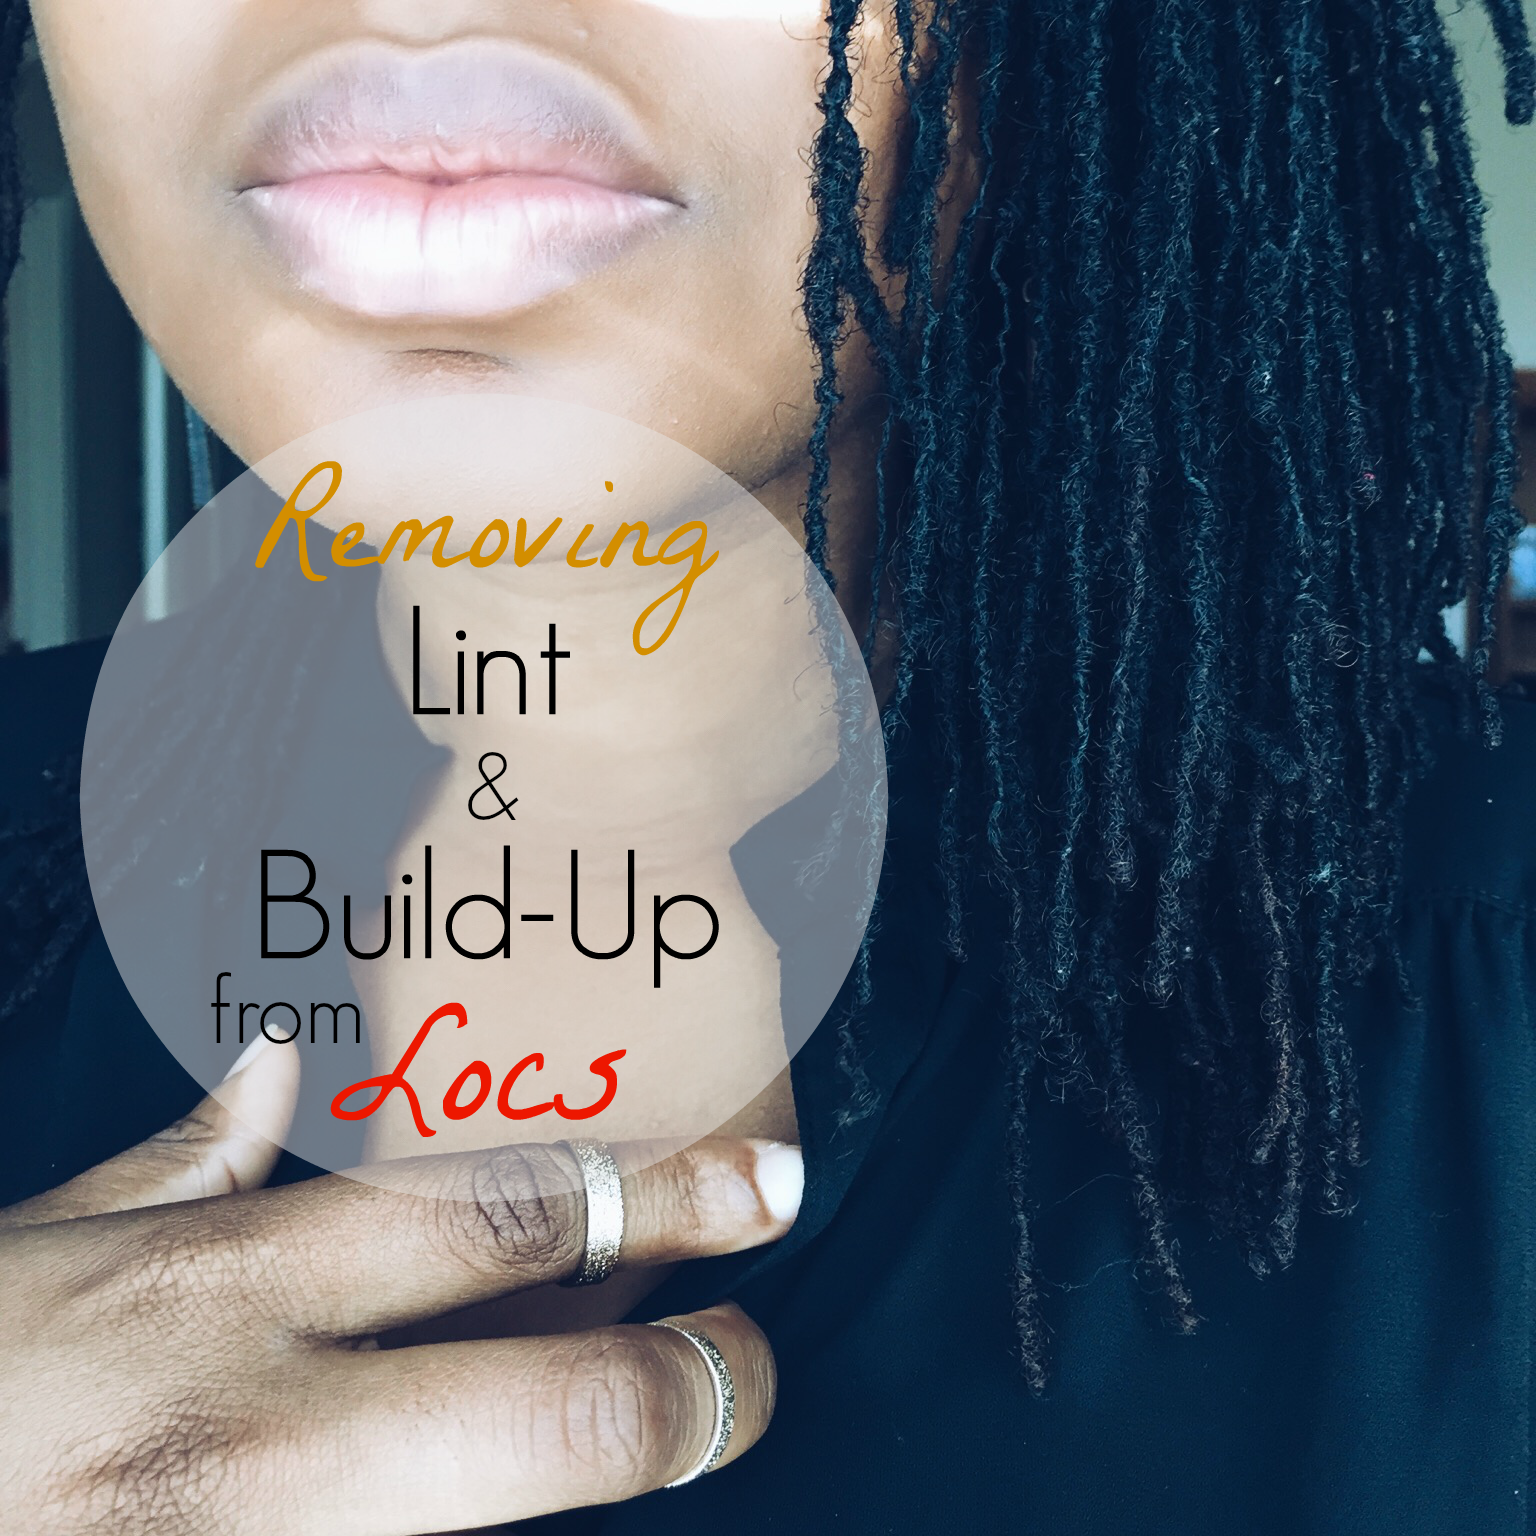 Buildup free product line made by a loctician for the Loc and